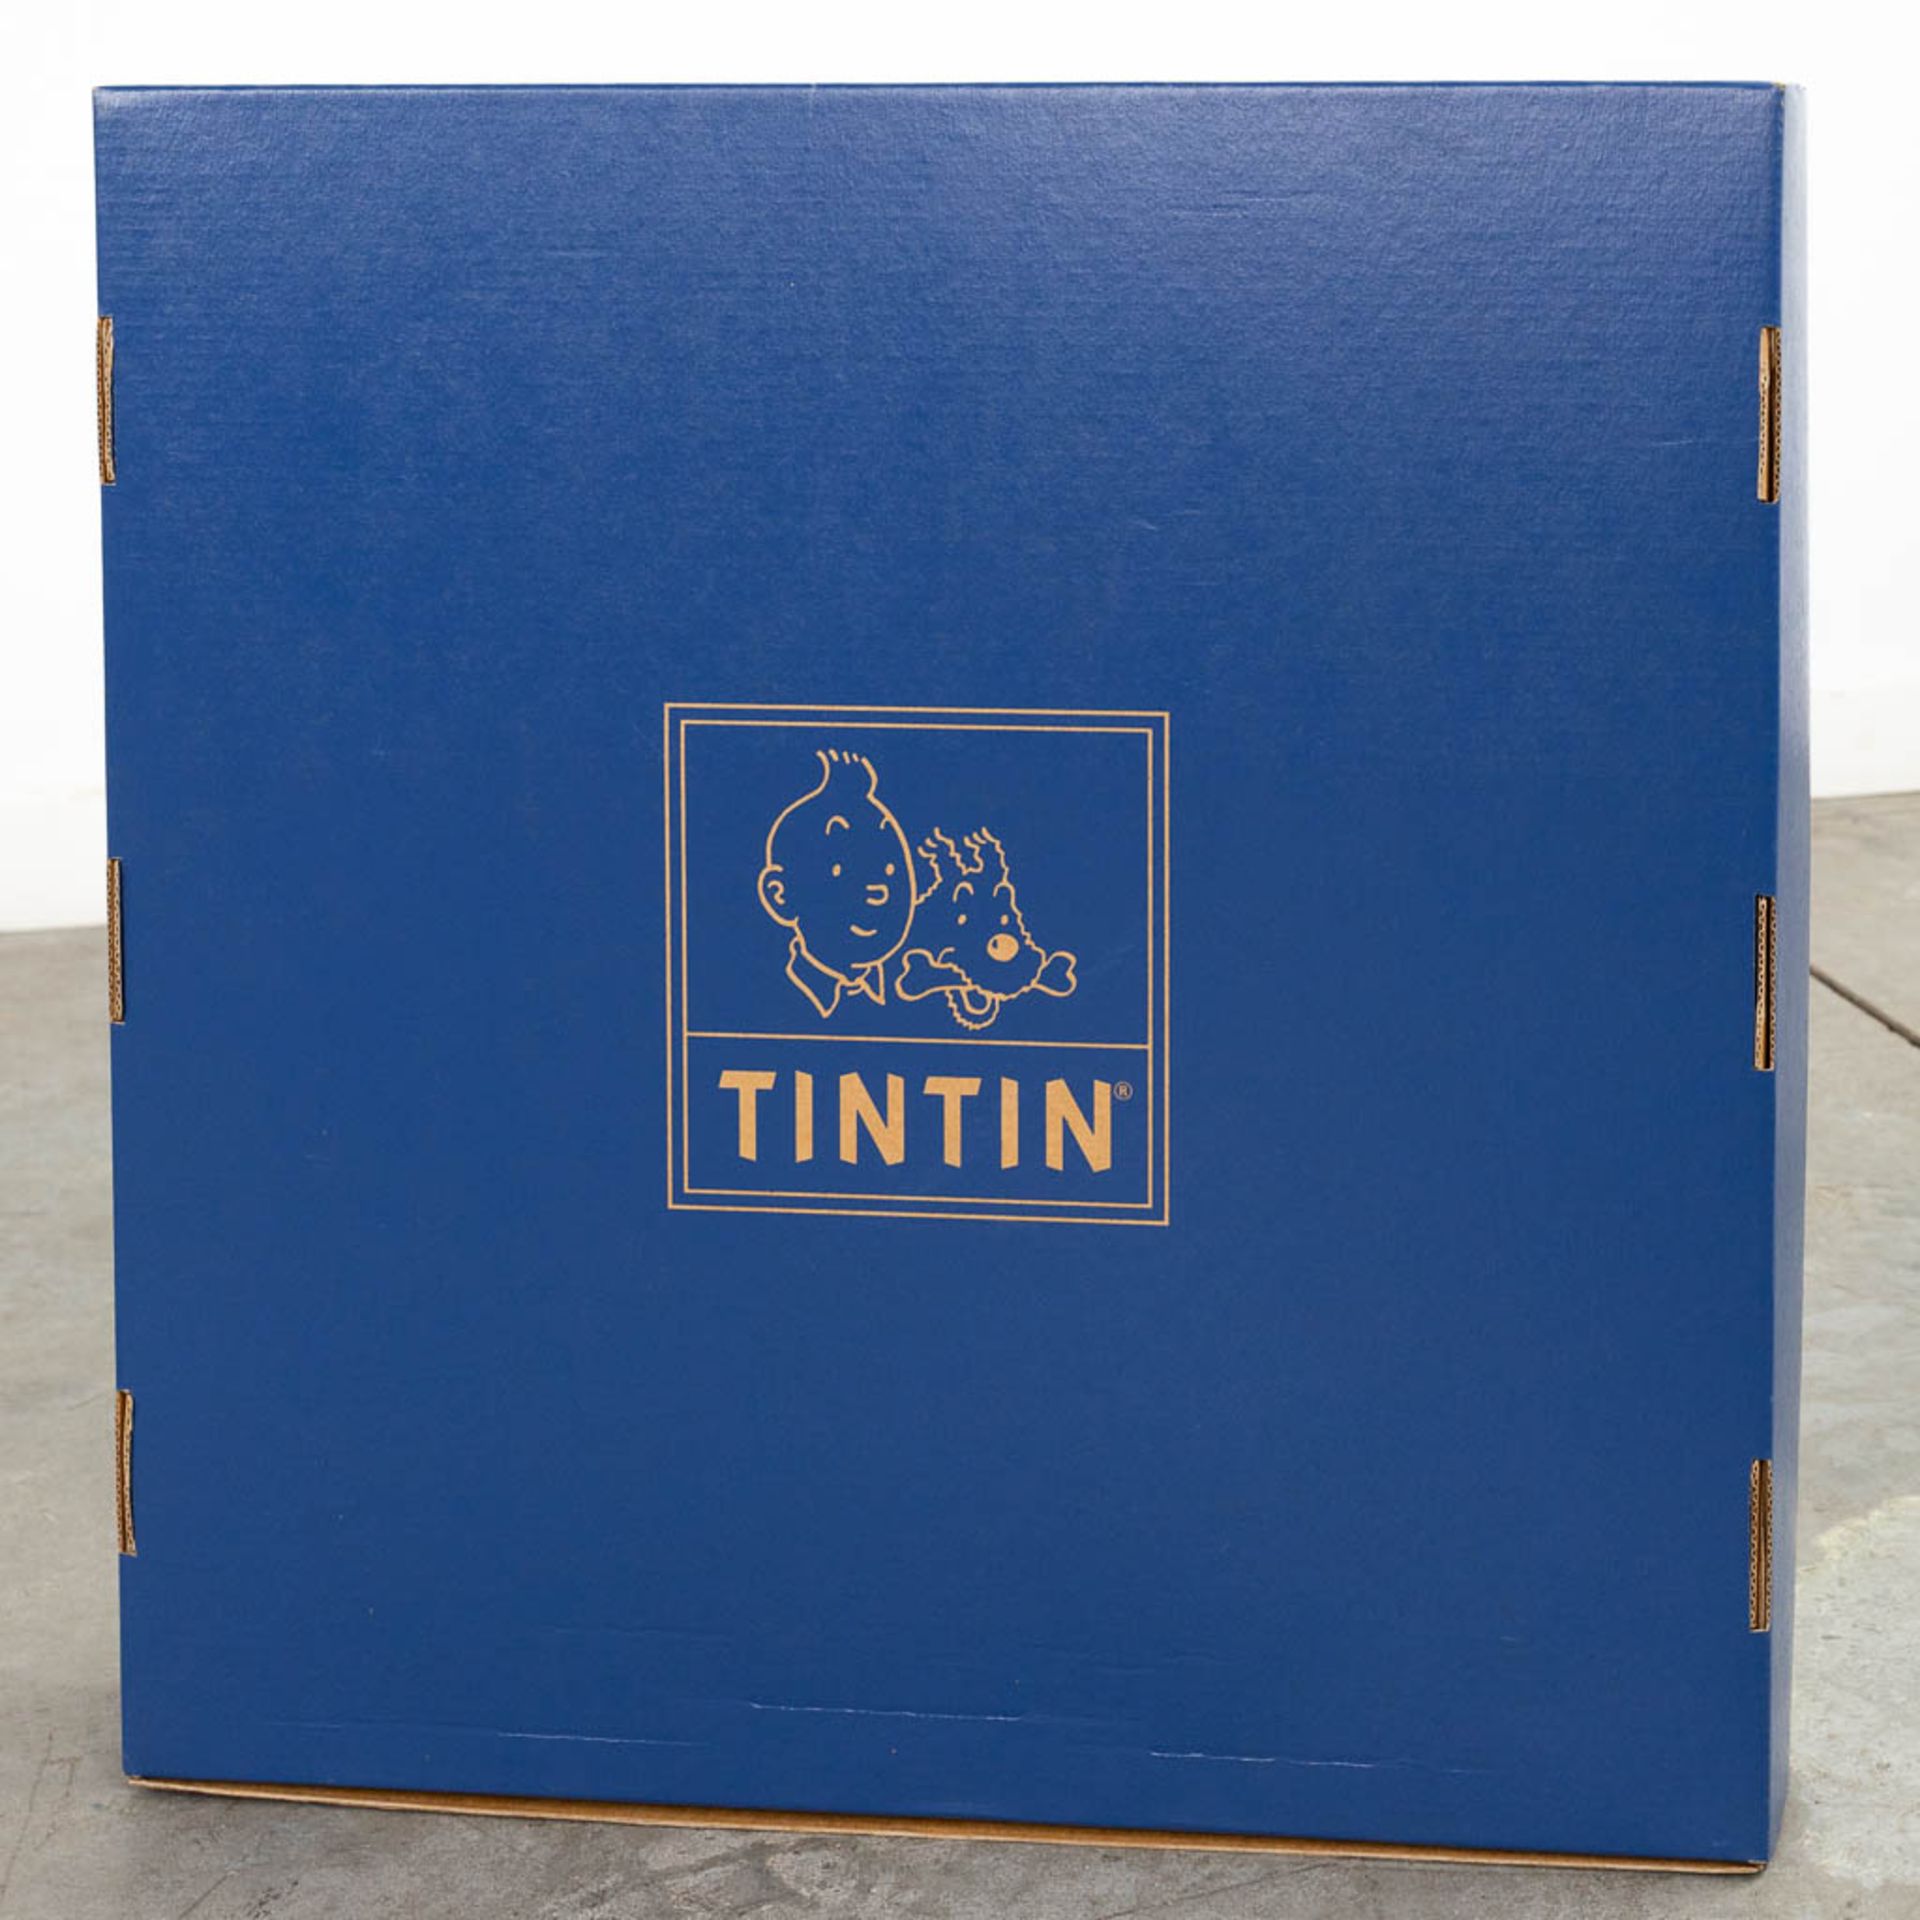 Tintin, a collection of 3 puppet show frames with matching dolls. (W:70 x H:114 cm) - Image 21 of 21